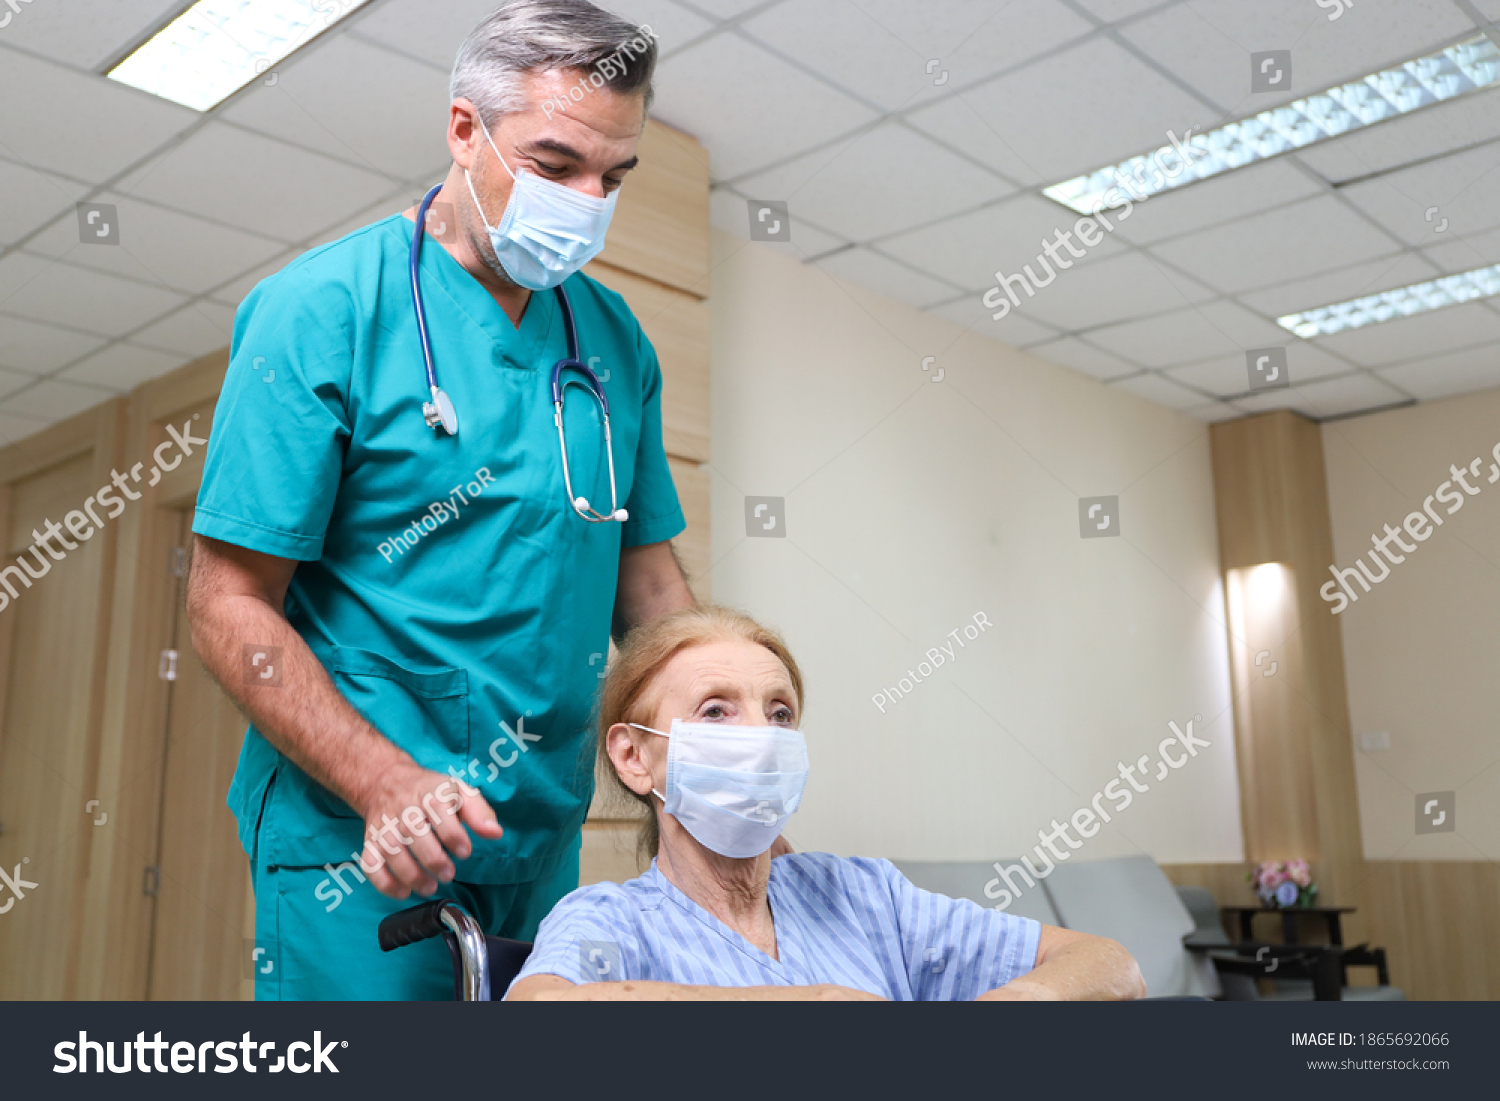 Doctor or assistance staff wear face mask and help a elder patient woman while sitting on wheelchair in the hospital, coronavirus pandemic protection #1865692066